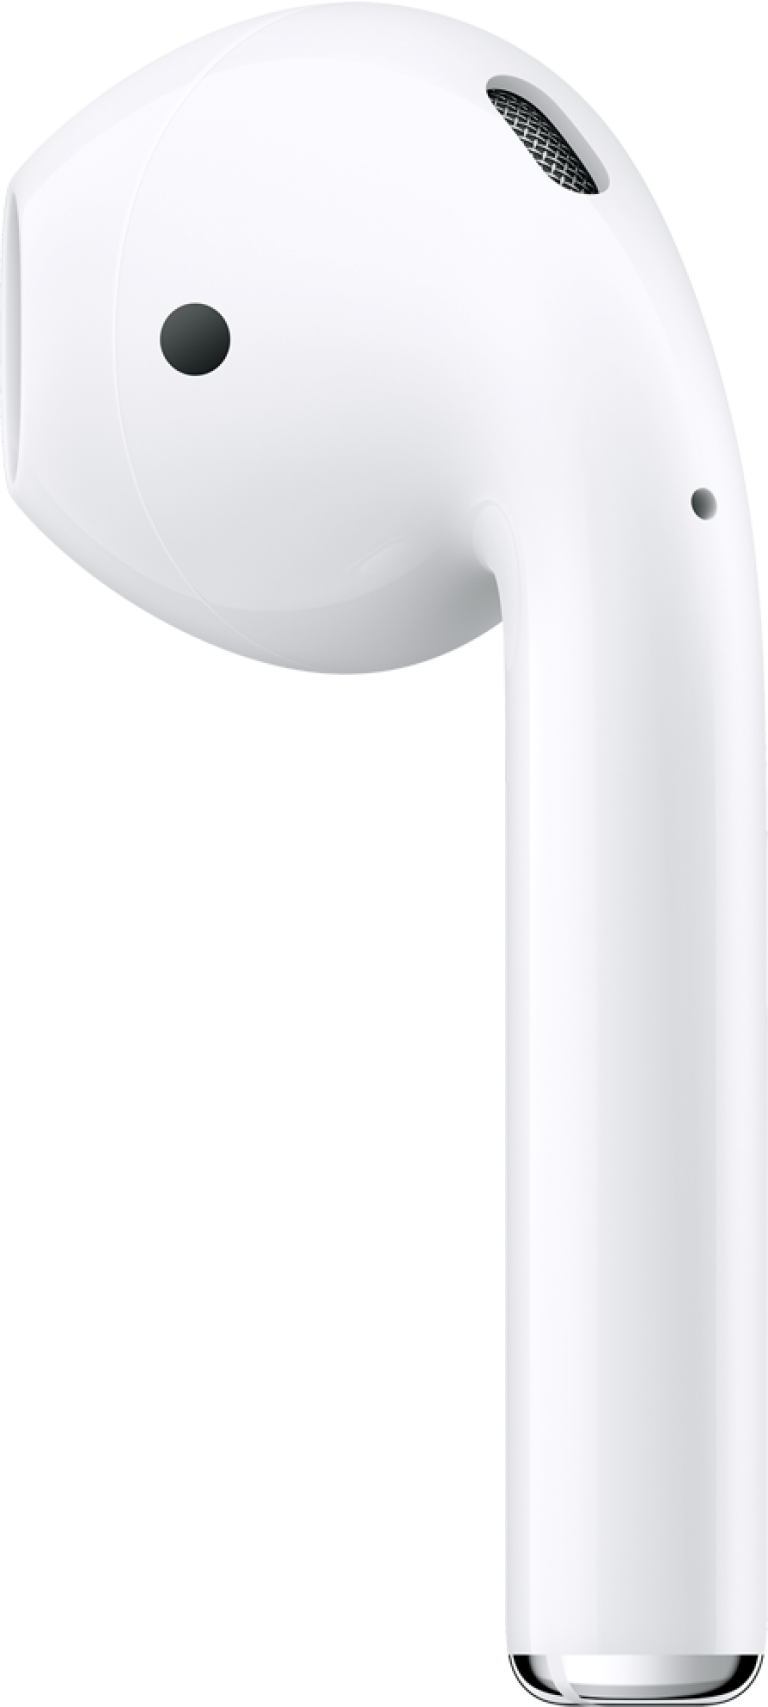 Airpods PNG Free Download